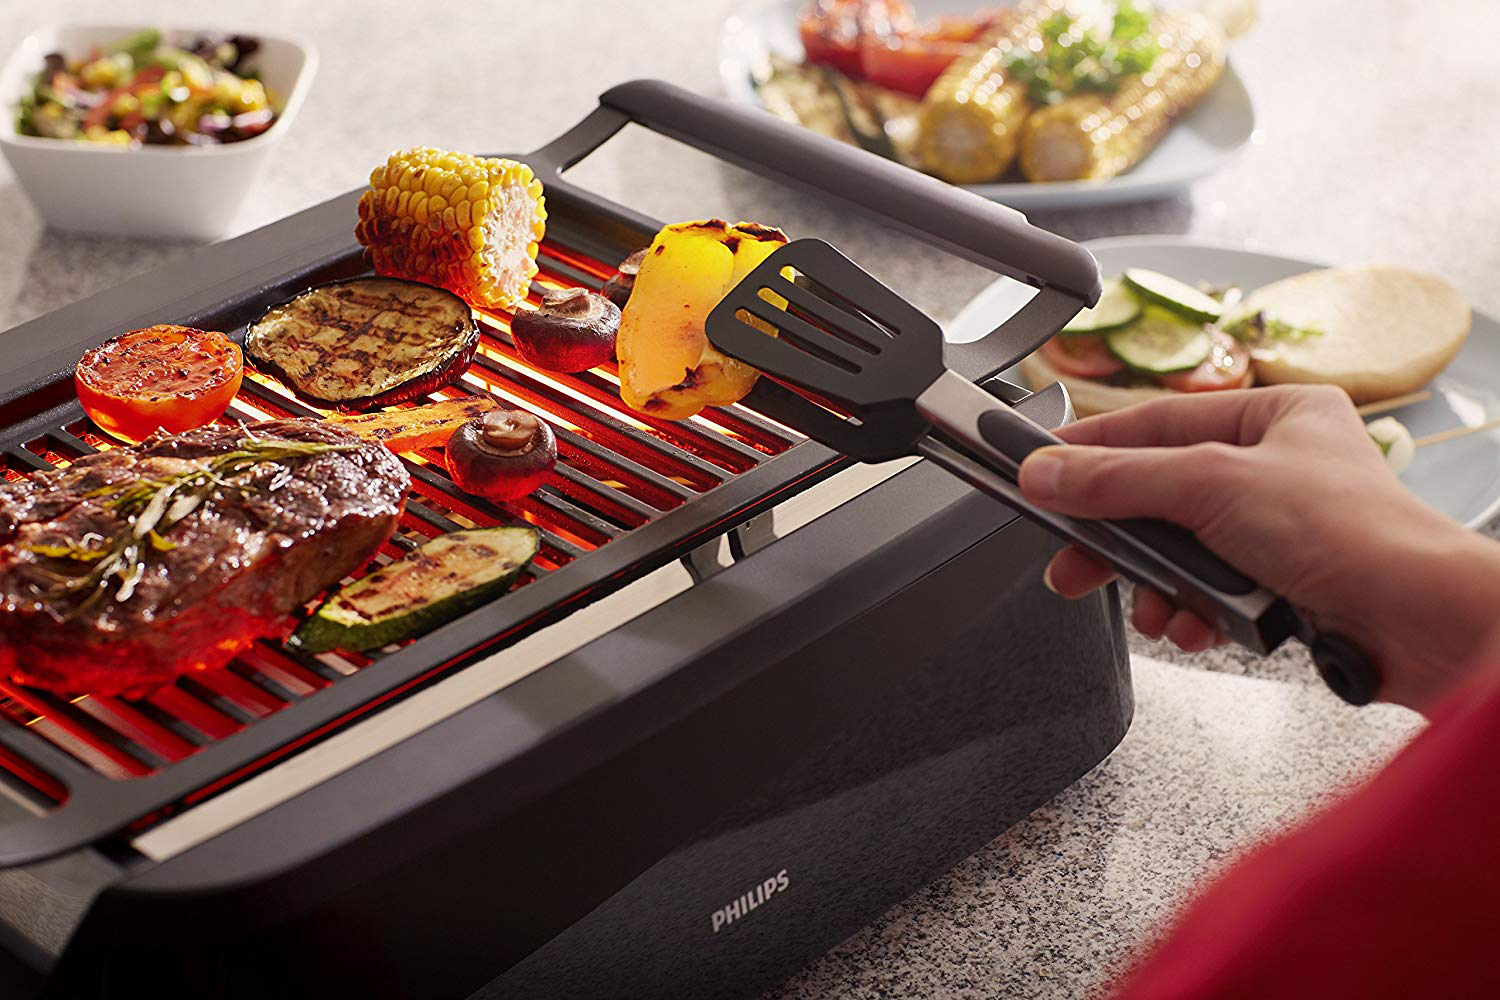 Create tasty summer food with 55% off this indoor grill